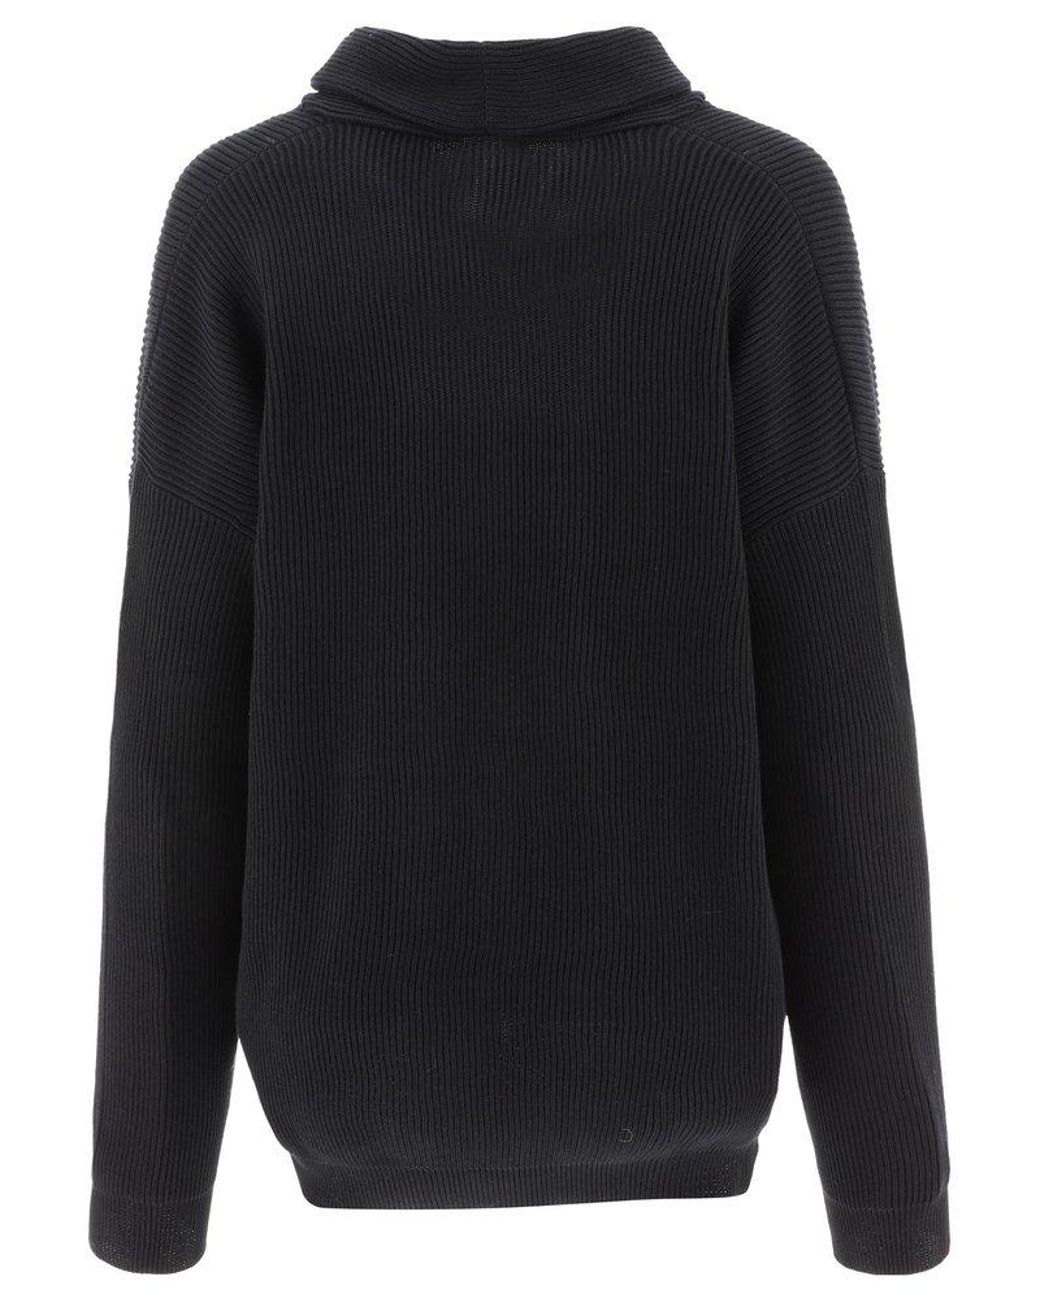 Brunello Cucinelli Ribbed Sweater With Rhinestones in Black - Save 